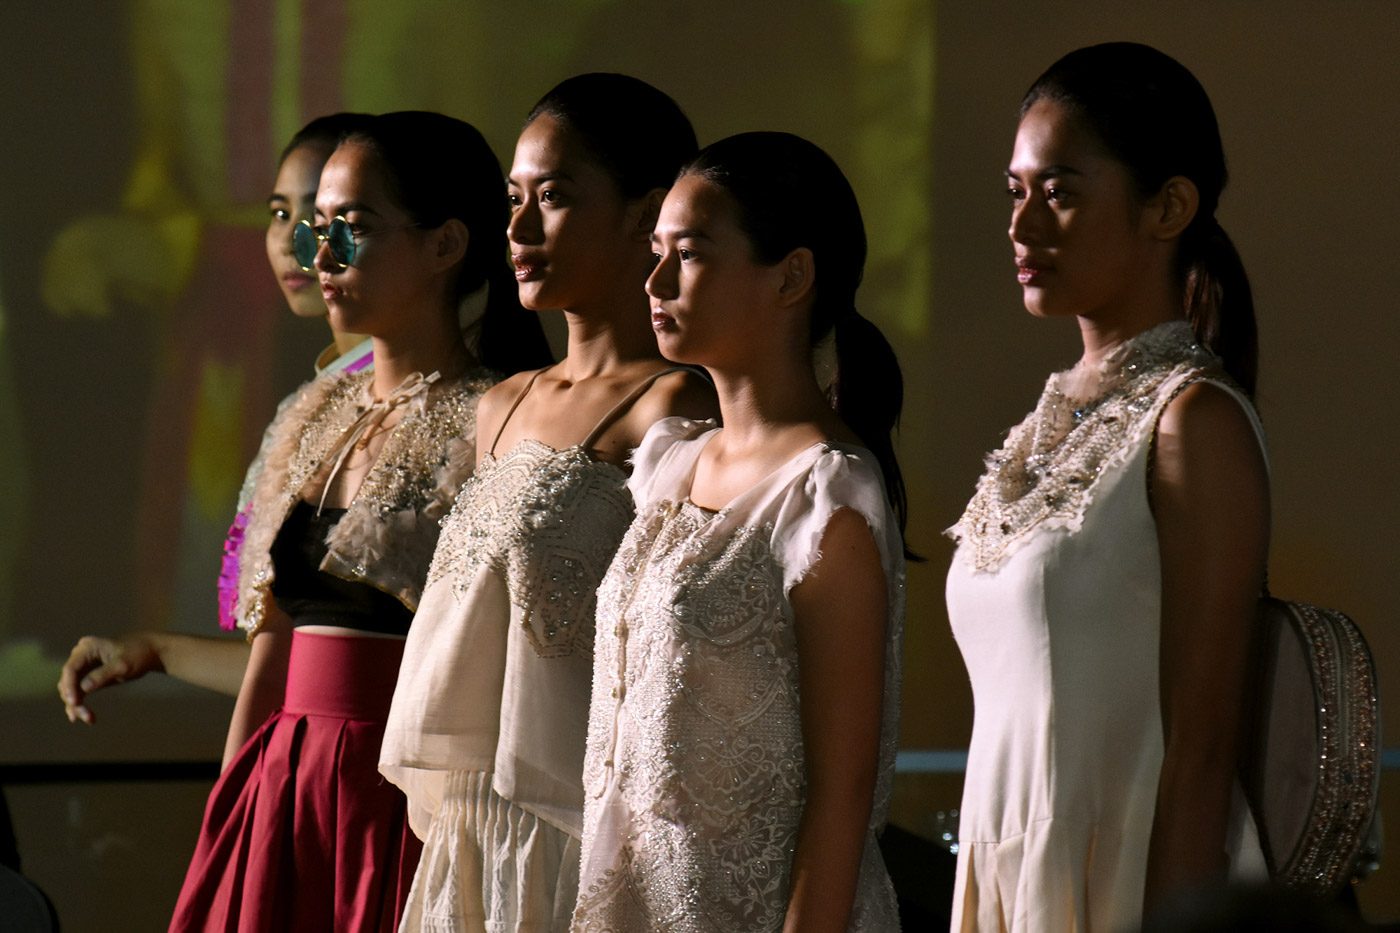 TRUE FILIPINO FASHION. Internationally-reknowned Filipino brand 'Aloysius Worldwide' strutted their designs which proudly incorporate local indeginous weaves. Photo by Angie de Silva/Rappler 